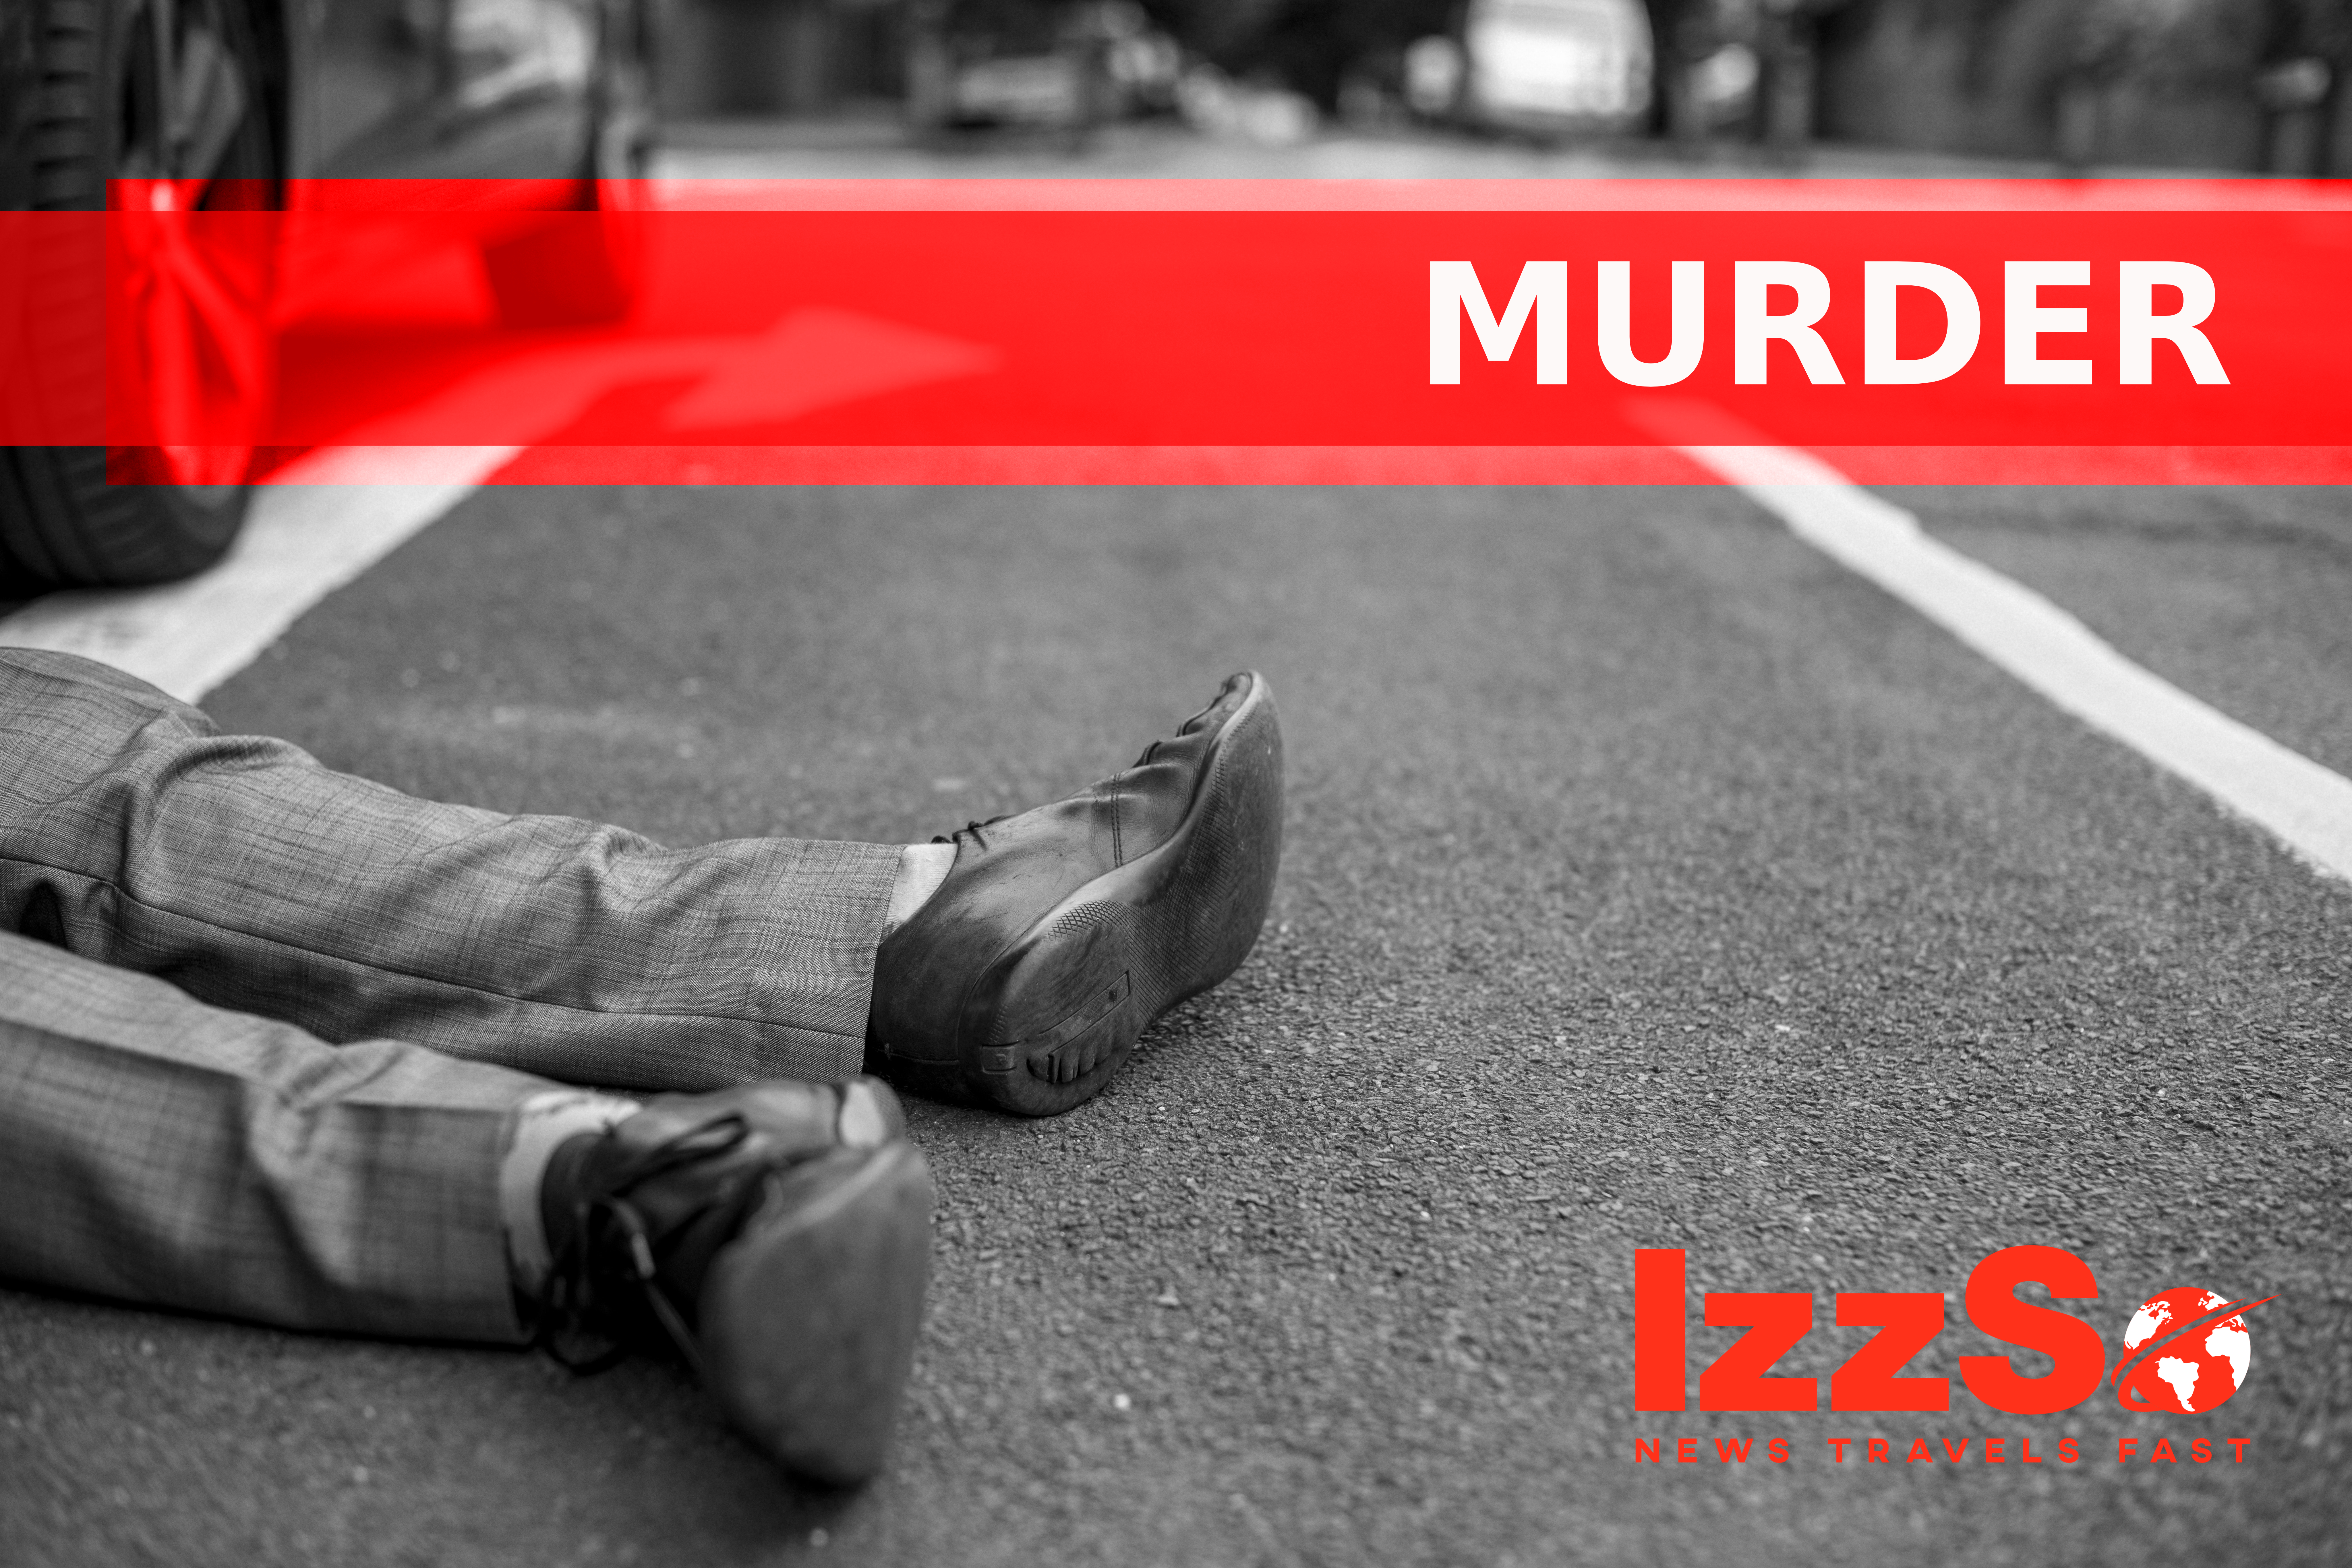 42-year-old customs clerk murdered in Cunupia